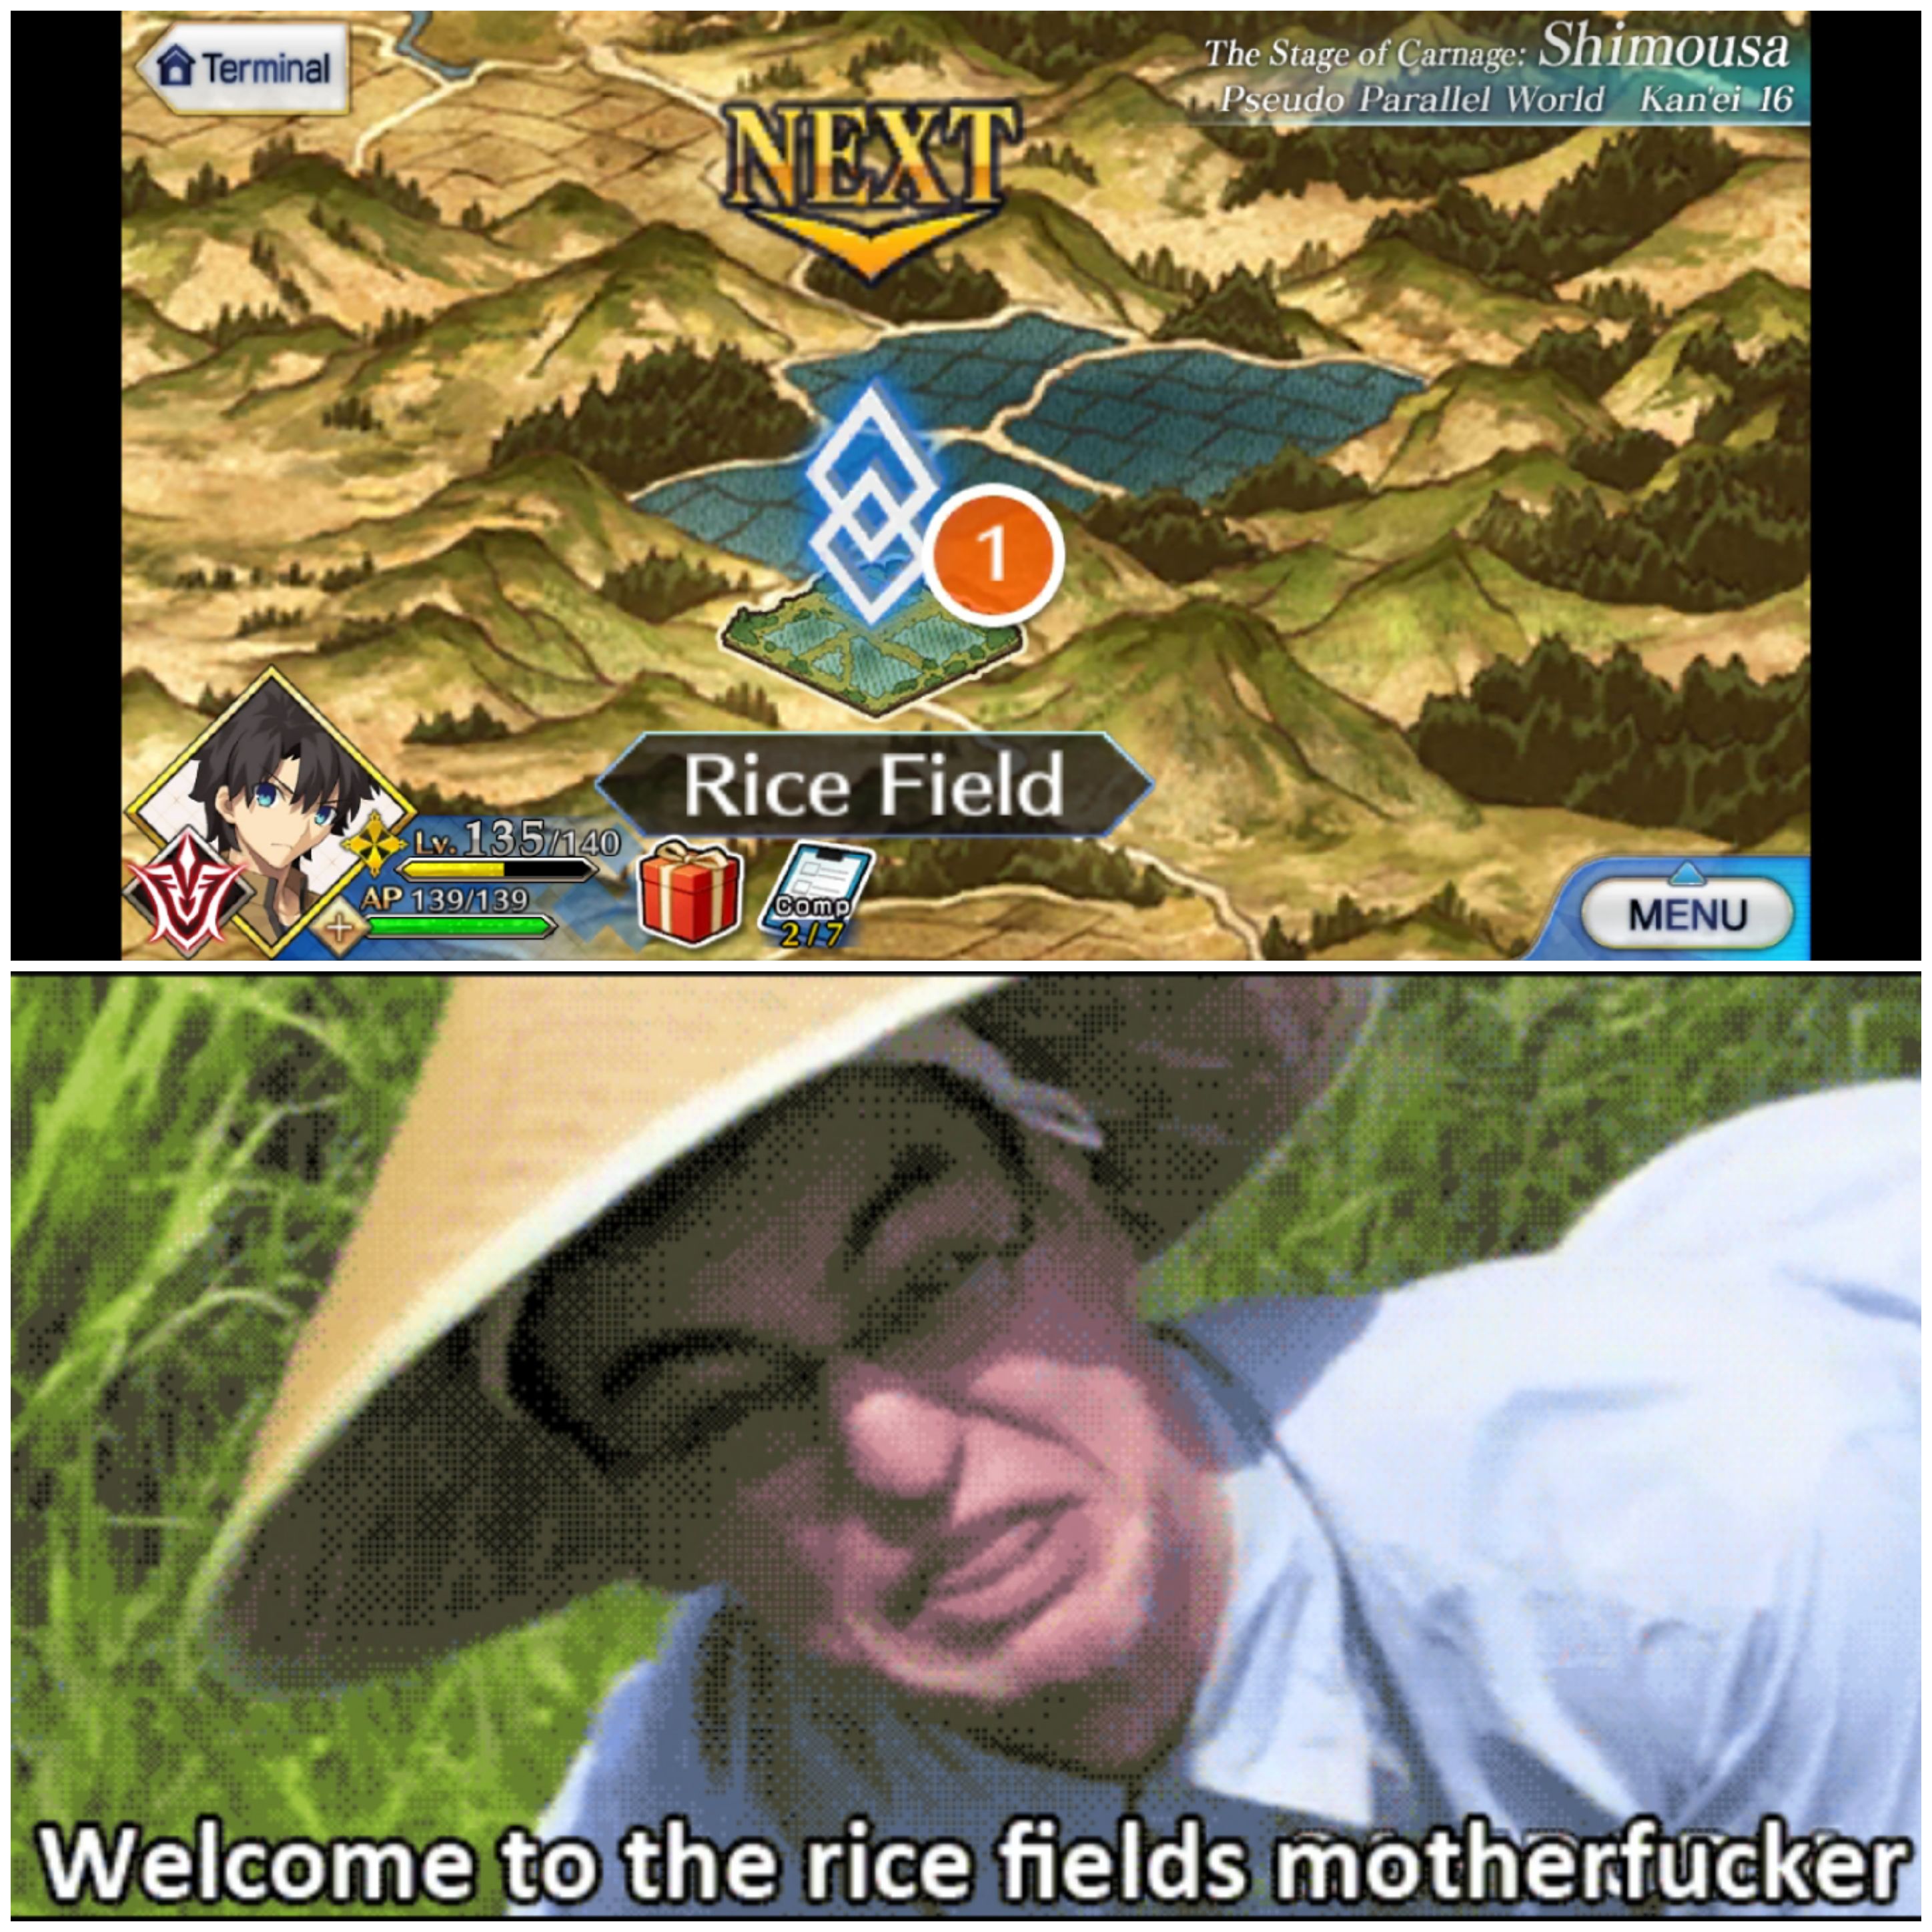 welcome to the rice feilds